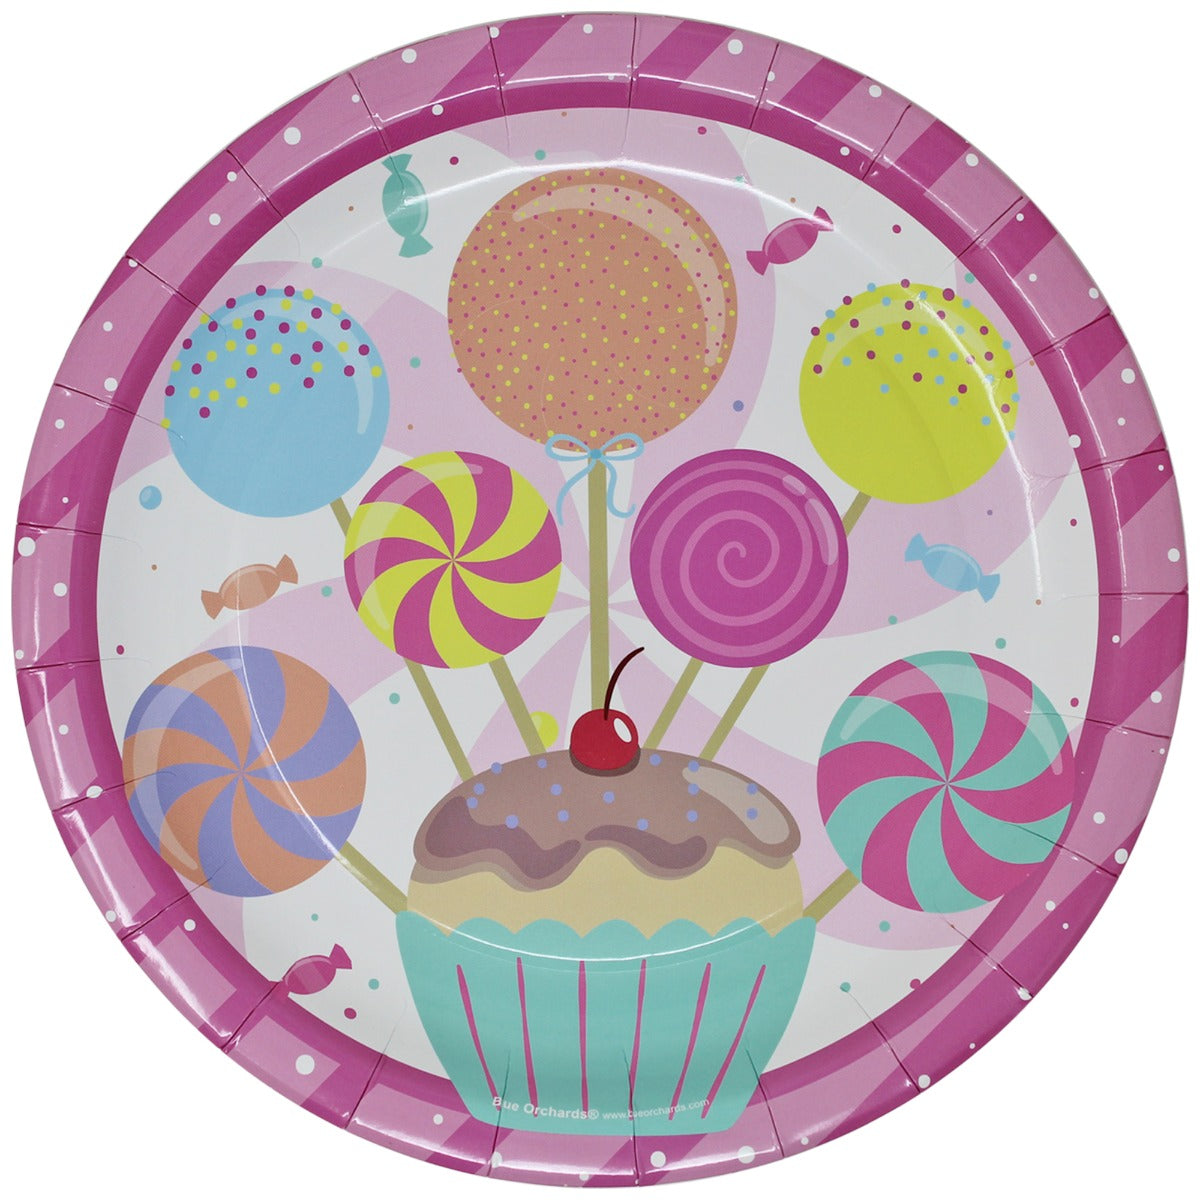 Candyland Party  Plates, Candy Party Plates, Candy Plates, Ice Cream Party Plates, Candyland Birthday Party Plates